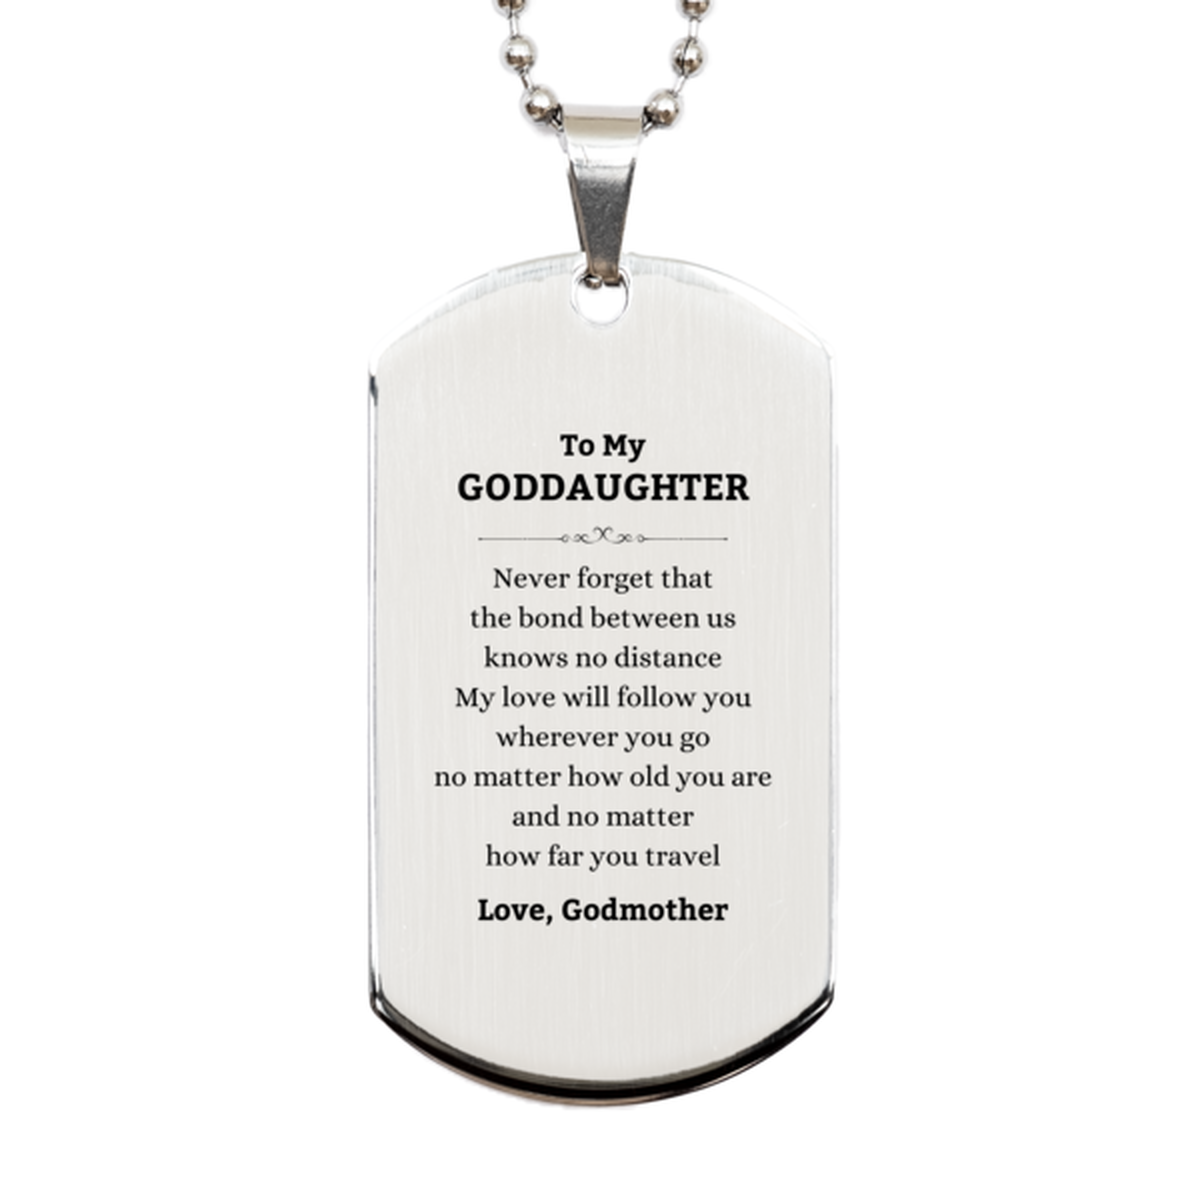 Goddaughter Birthday Gifts from Godmother, Adjustable Silver Dog Tag for Goddaughter Christmas Graduation Unique Gifts Goddaughter Never forget that the bond between us knows no distance. Love, Godmother